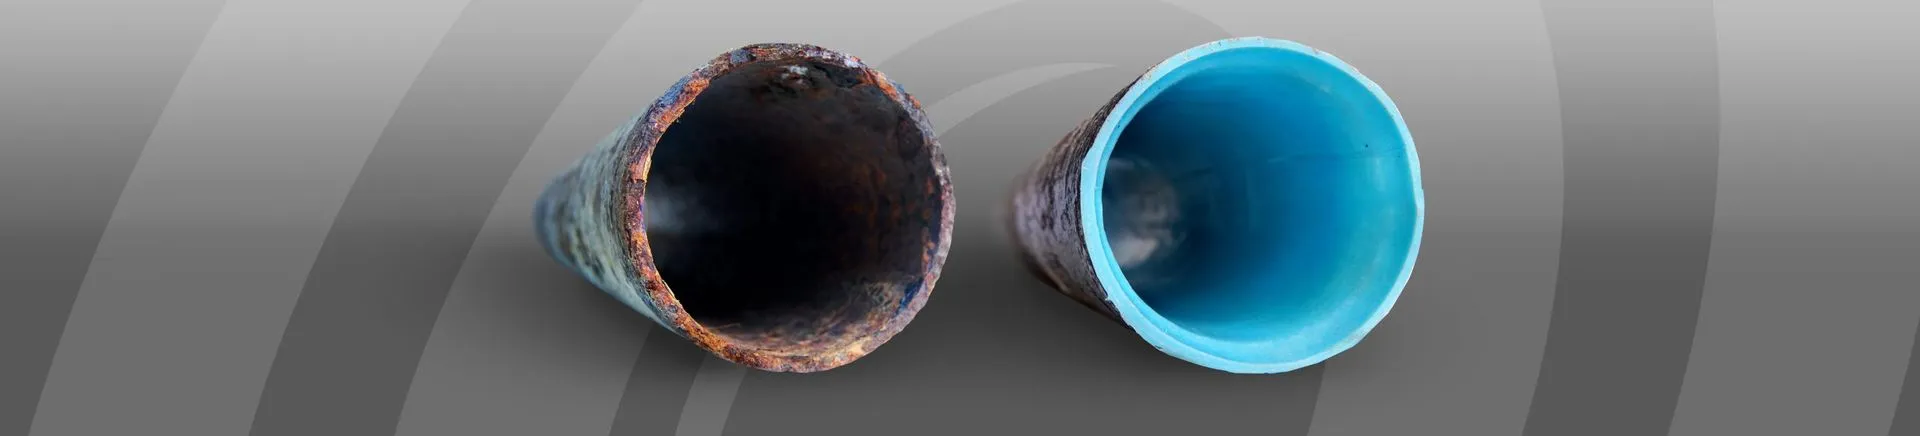 Sewer drain pipes before and after relining